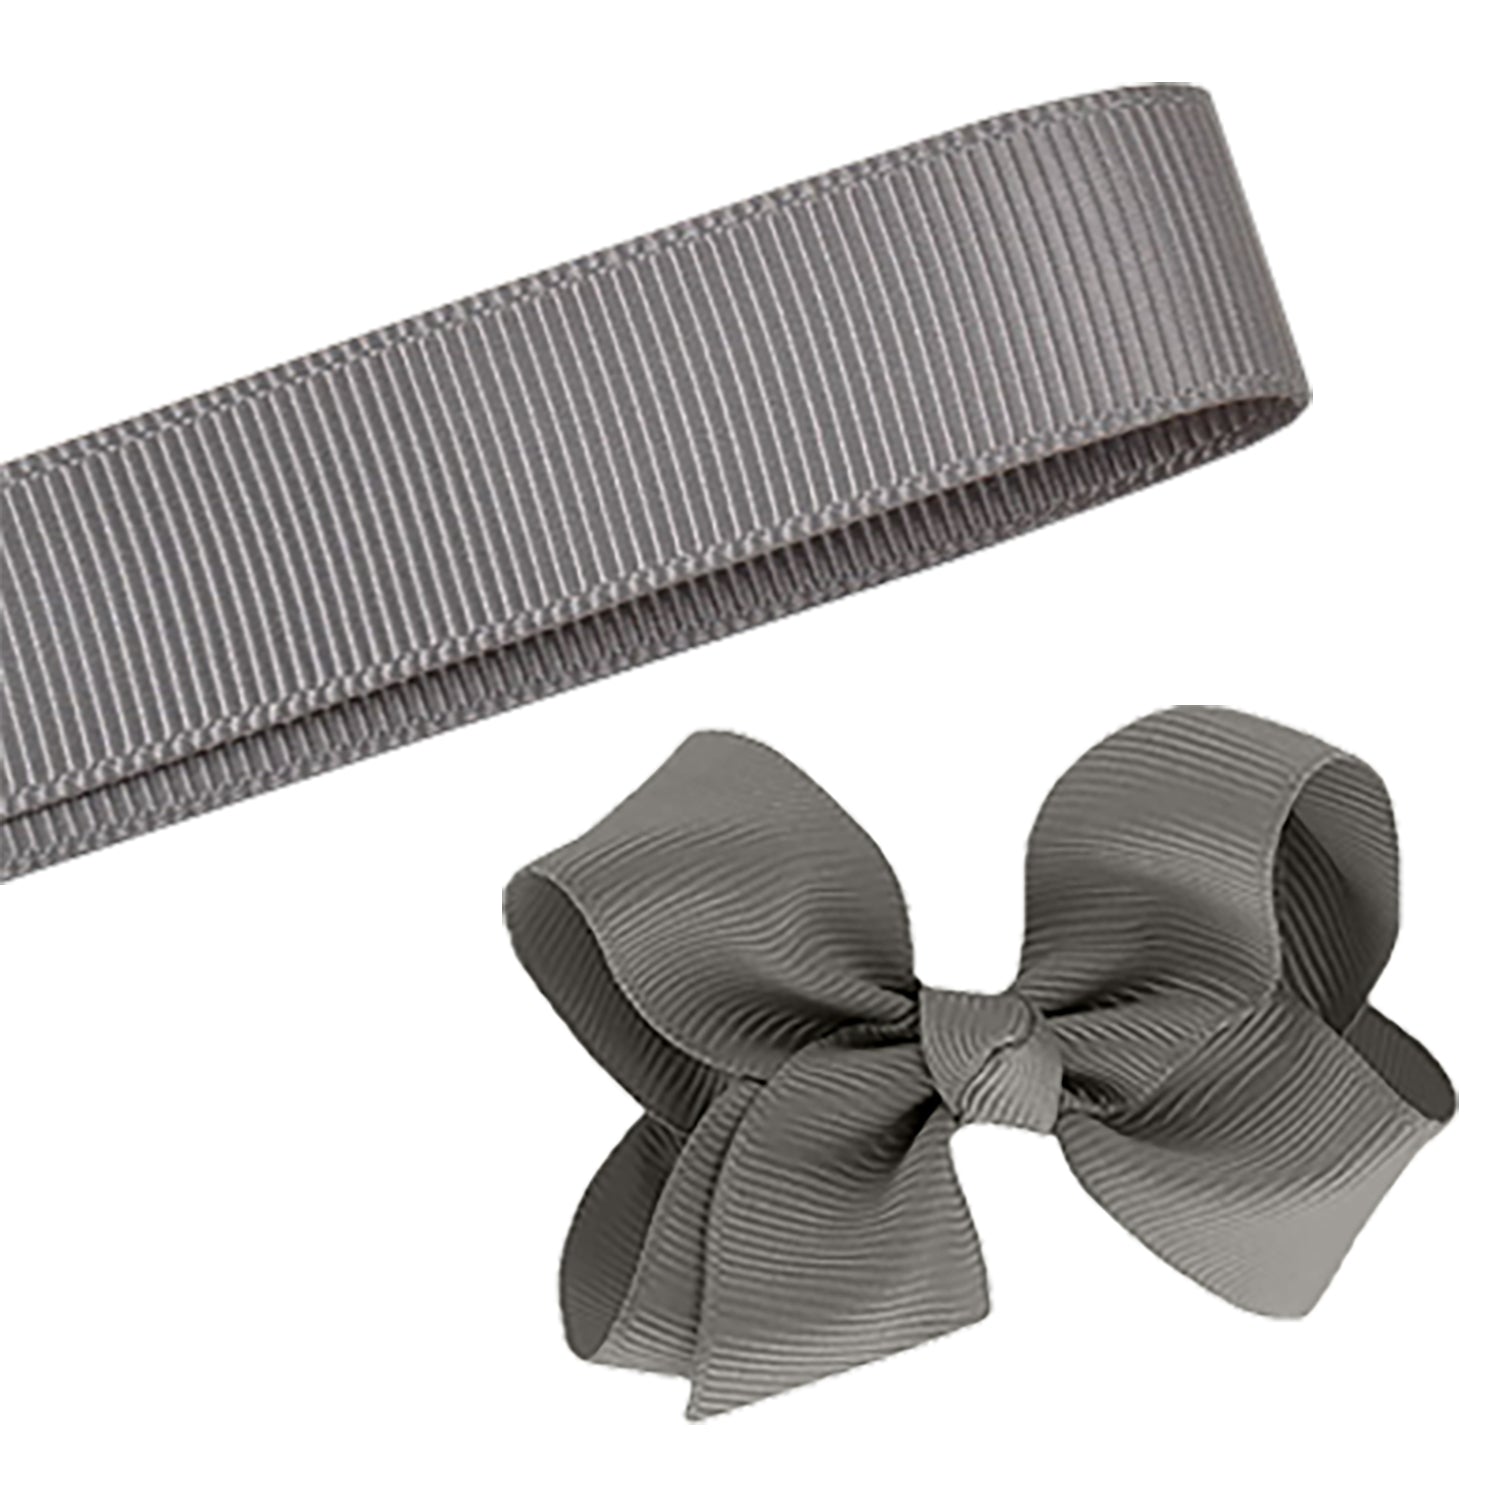 Pewter Grey Texture Grosgrain Ribbon - 2 1/4 Inches x 50 Yards - JAM Paper